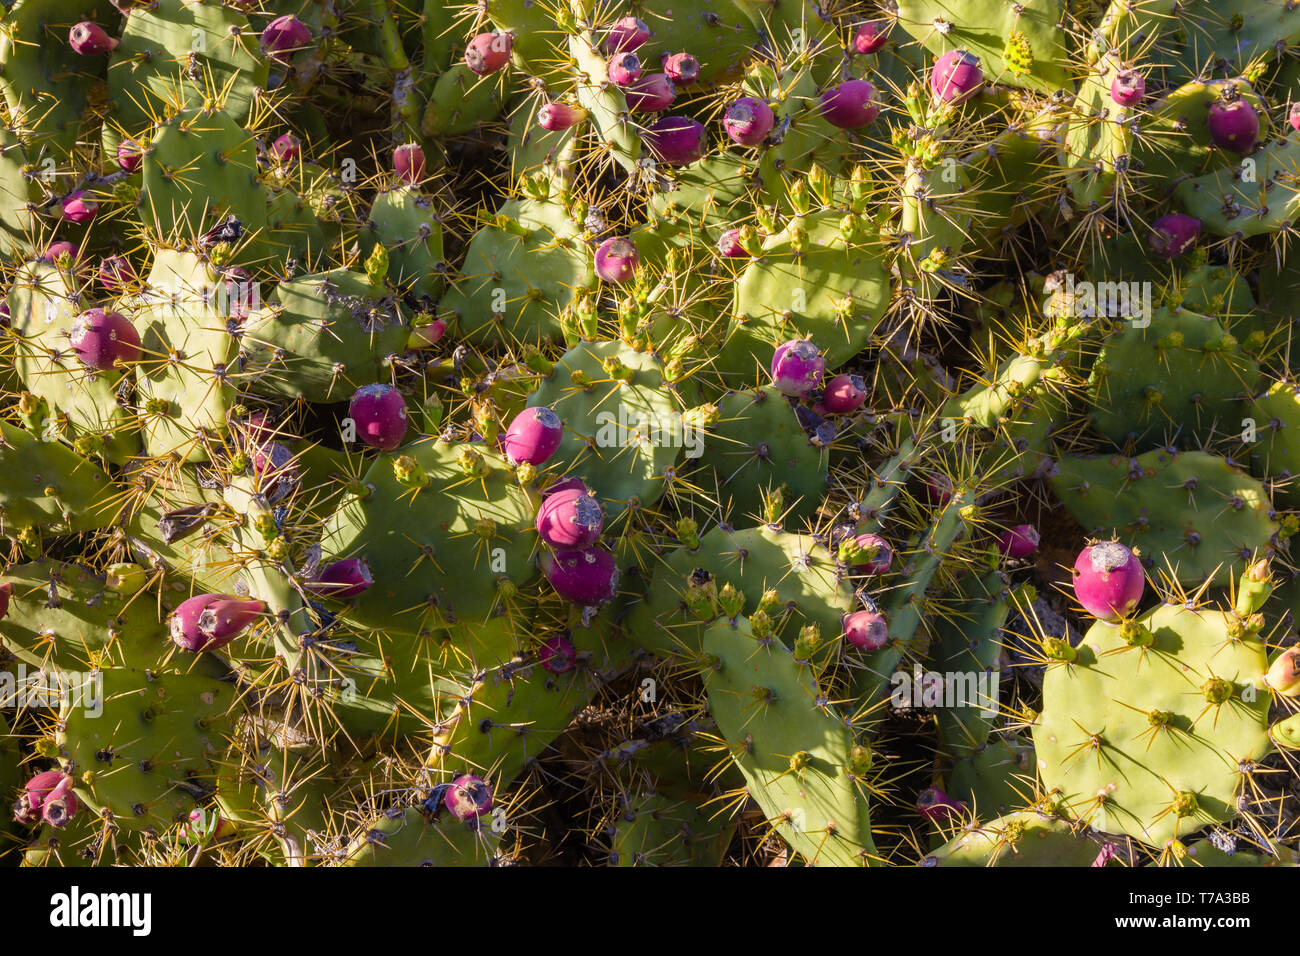 Prickly pear cactus is growing abundantly on the island Tenerife, Canary Islands, Spain Stock Photo